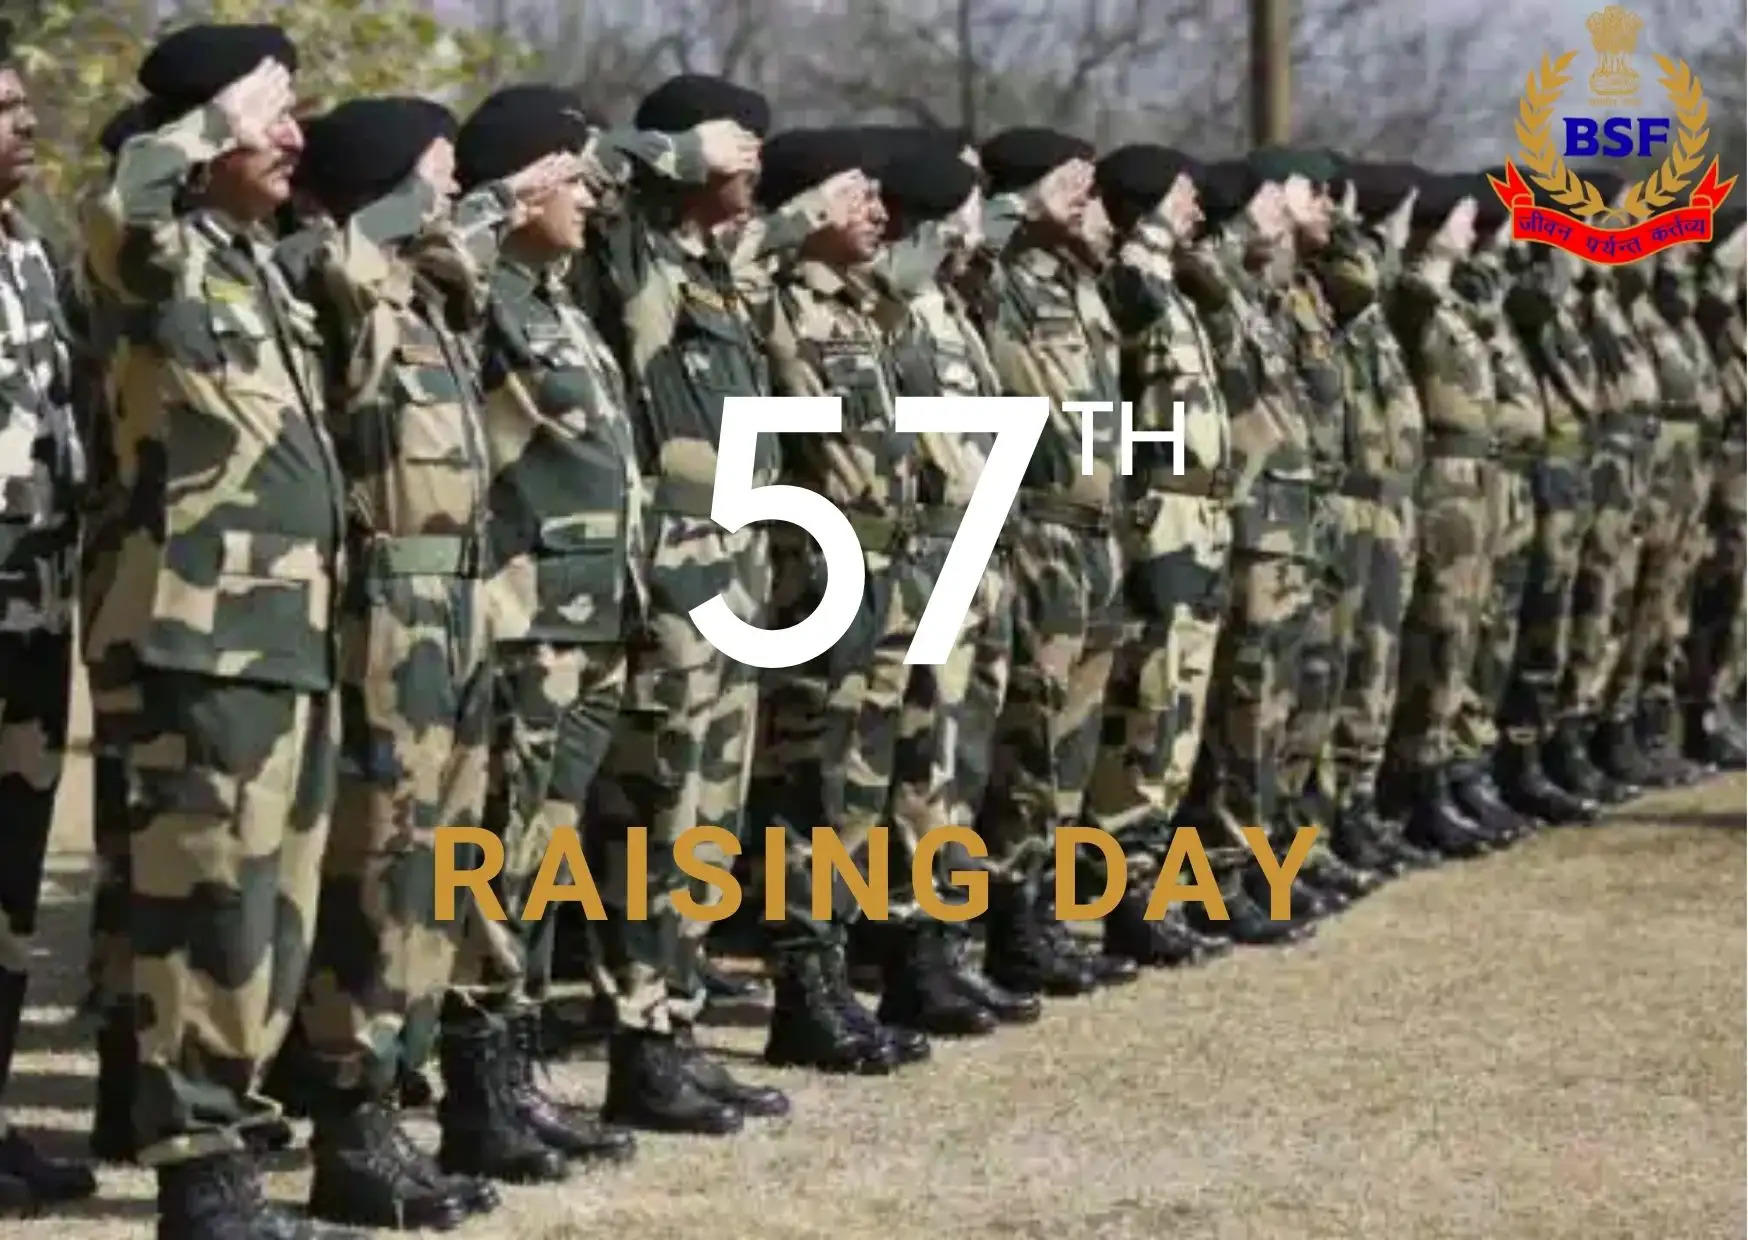 BSF 57 RAISING DAY BORDER SECURITY FORCE